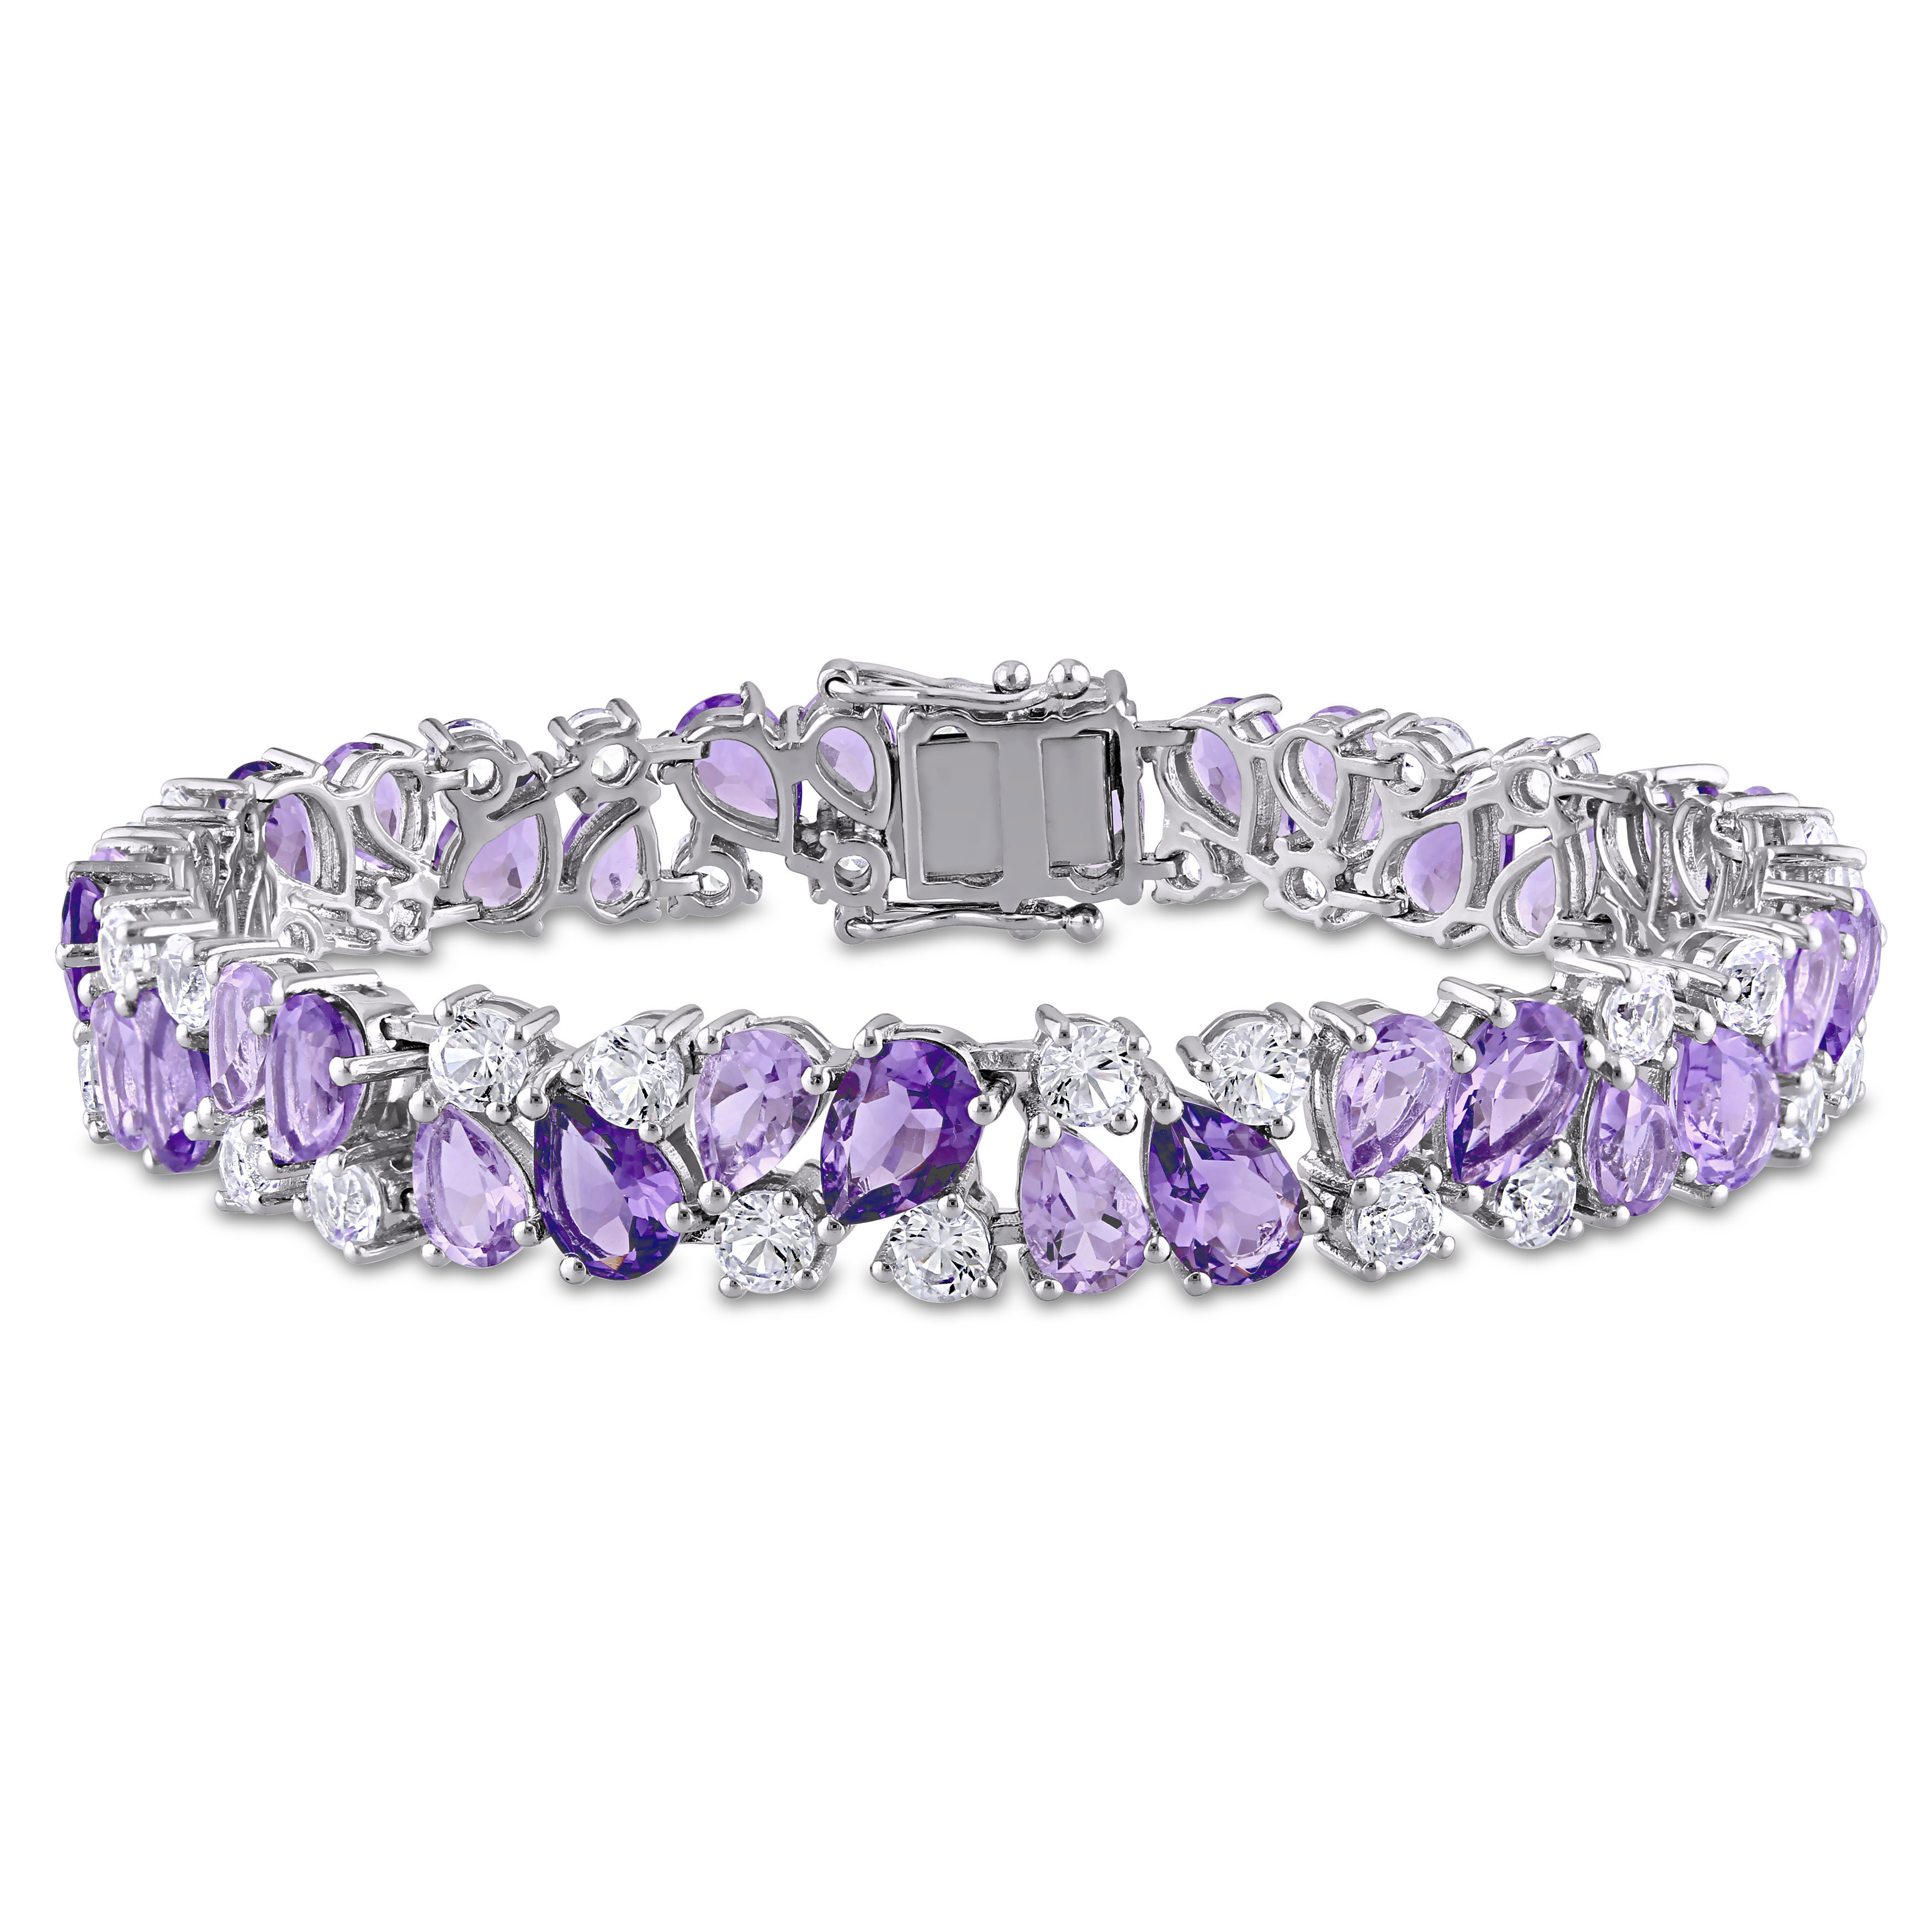 27 1/6 CT TGW Rose de France Amethyst and Created White Sapphire Vintage Bracelet in Sterling Silver